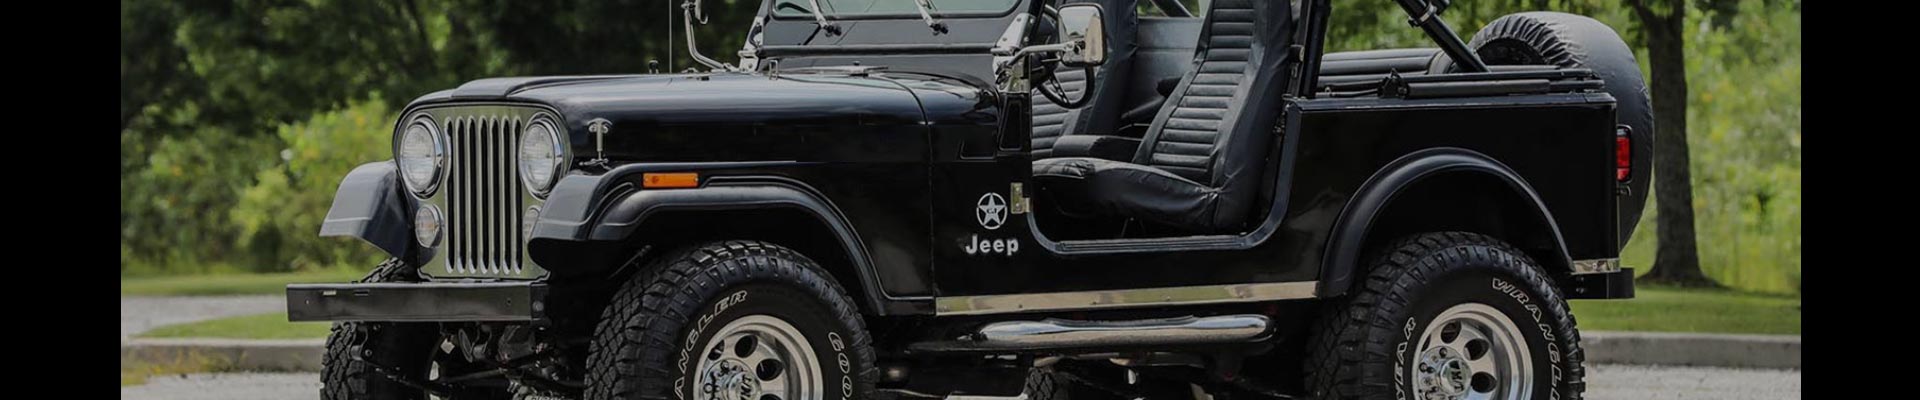 Shop Replacement and OEM 1986 Jeep CJ7 Parts with Discounted Price on the Net